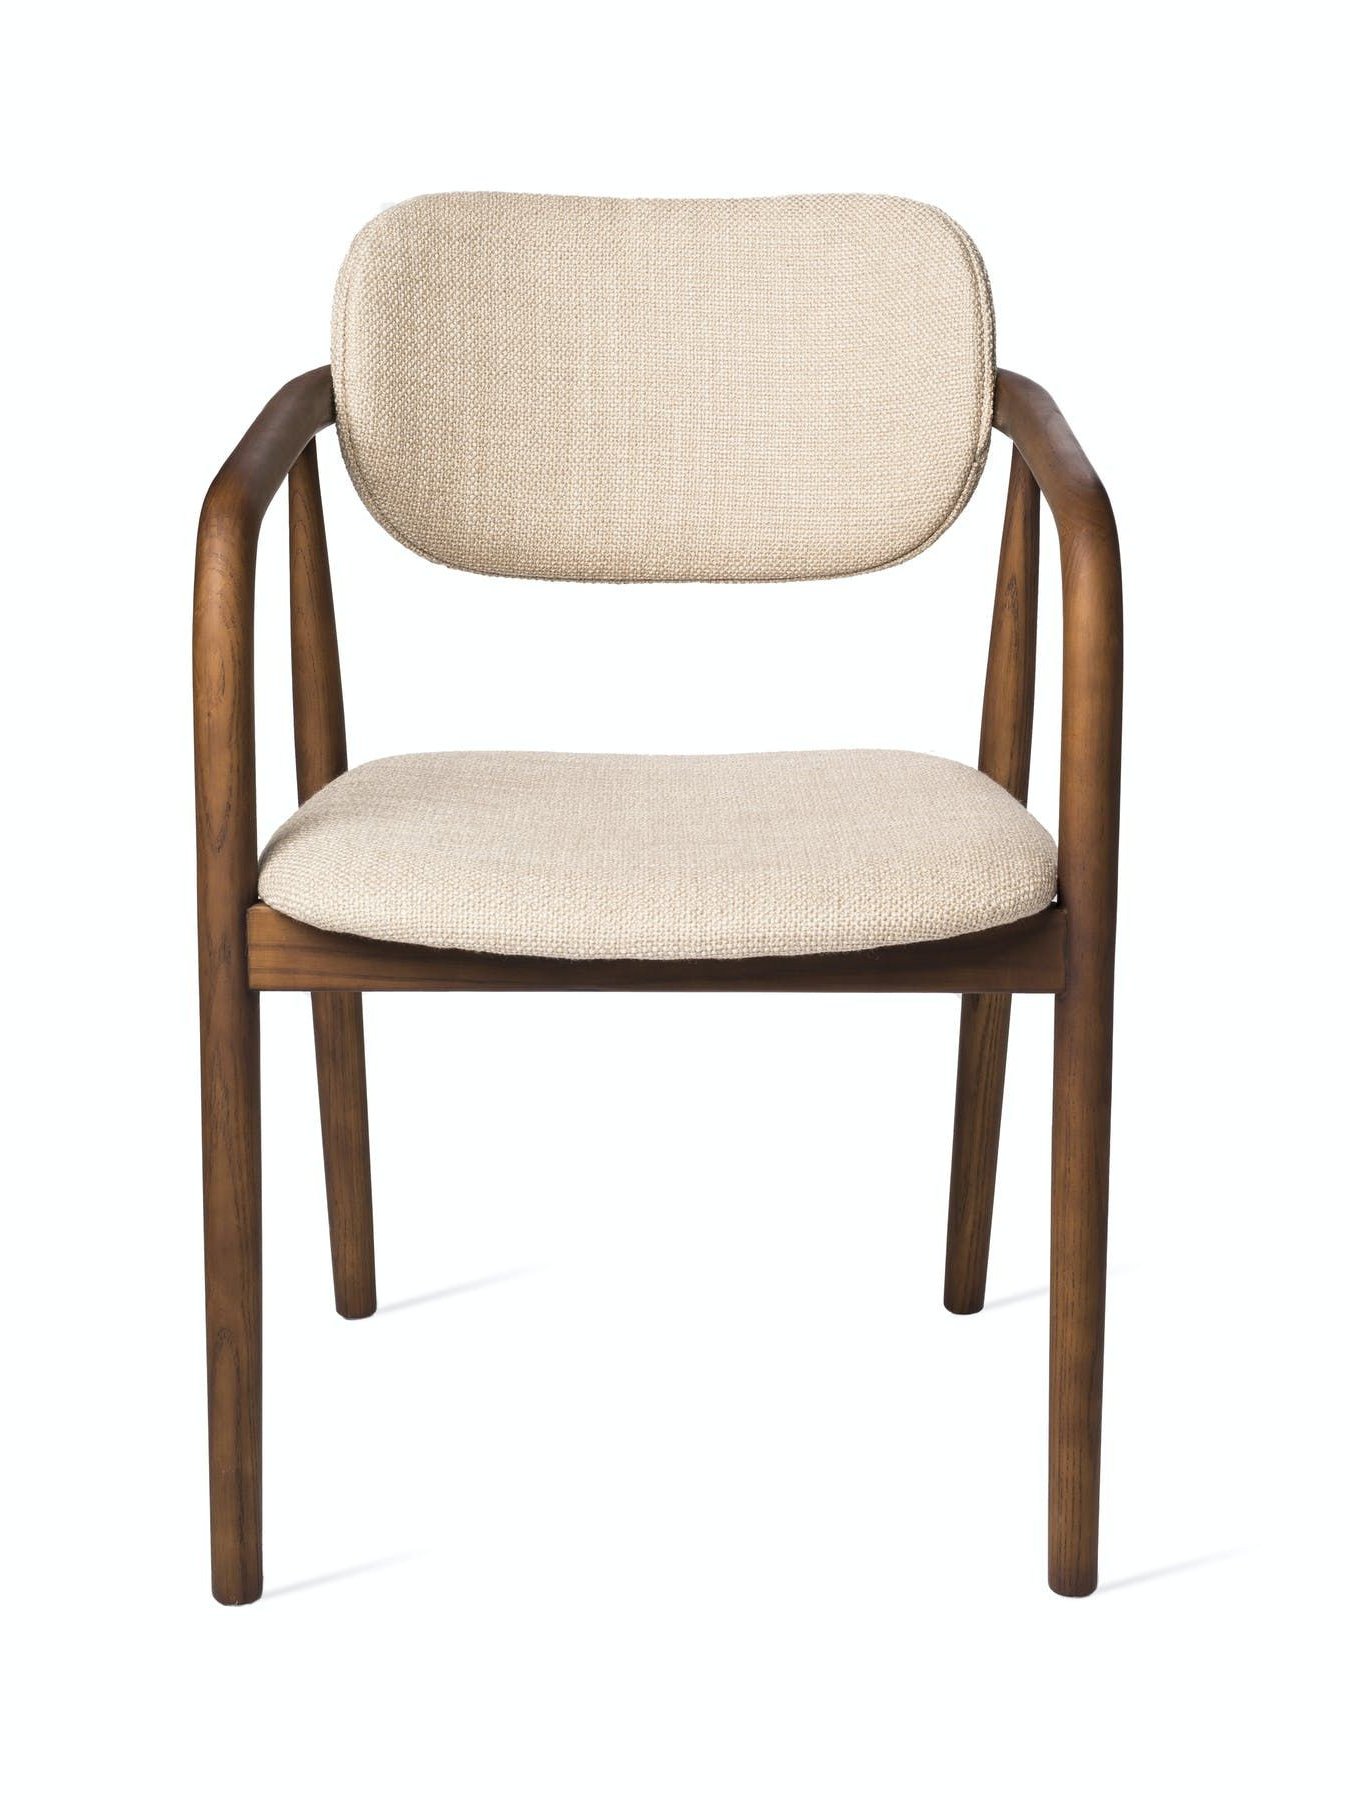 Pols Potten Ashwood chair with rust fabric, Henry